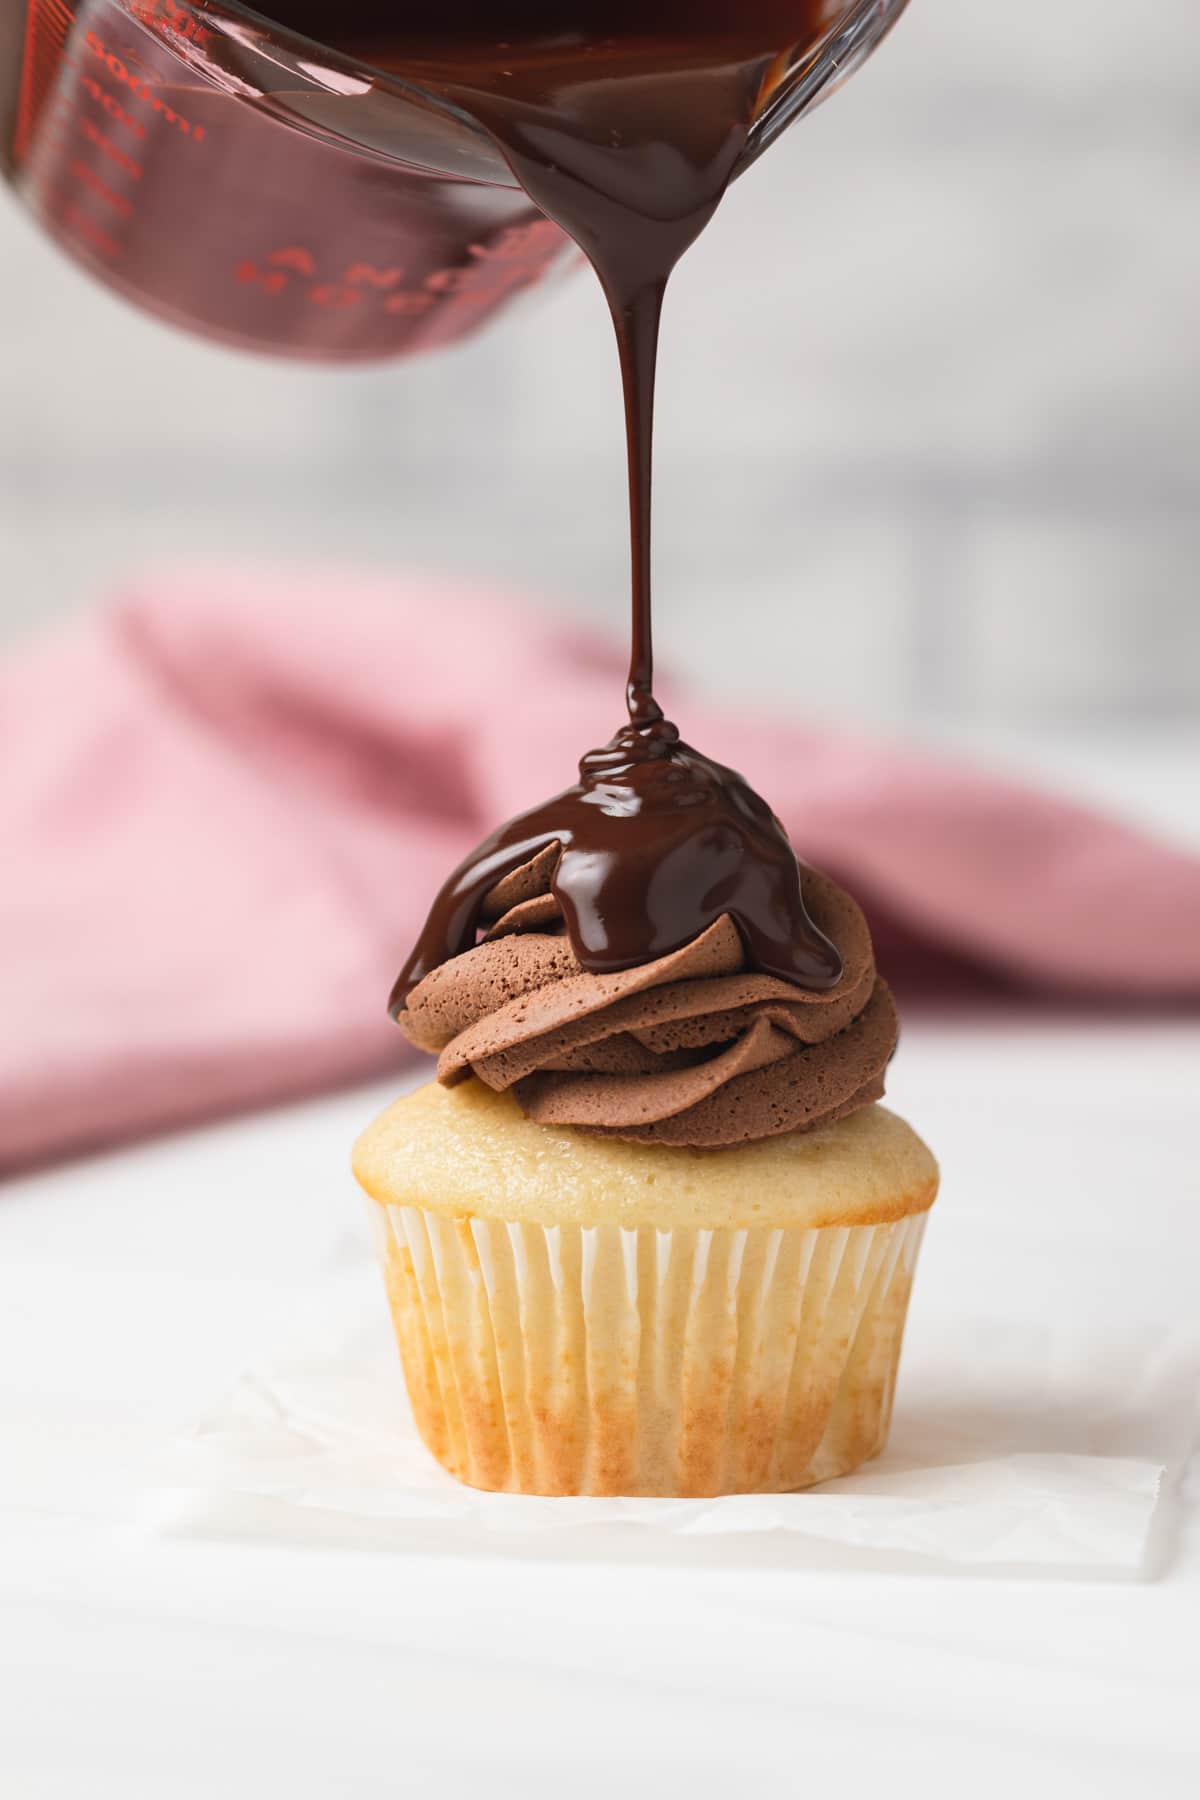 chocolate glaze being poured over chocolate frosting on a vanilla cupcake